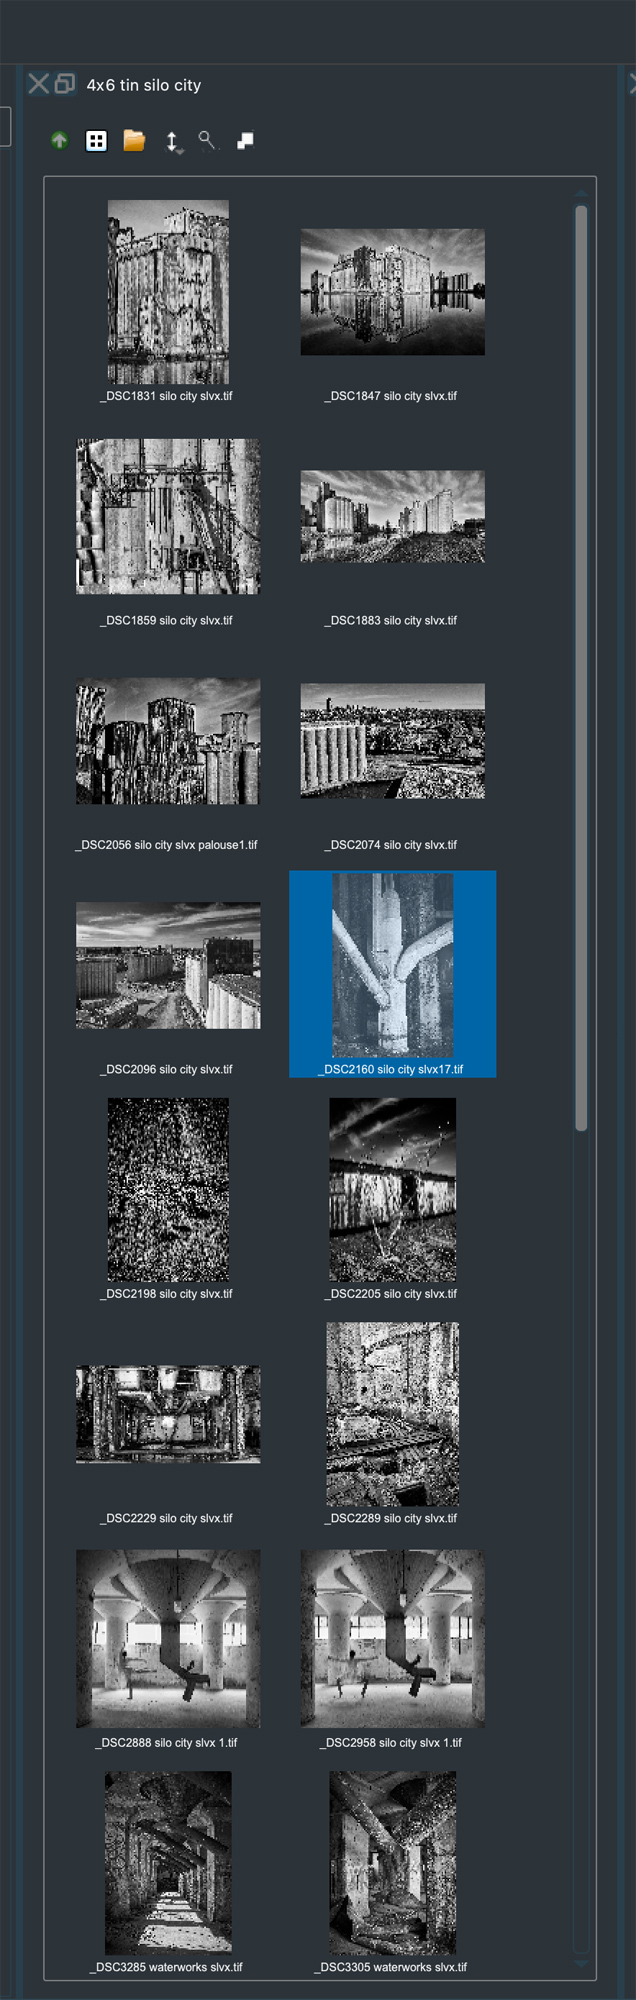 These are the thumbnails in the preview window. You click on an image and drag it over to the blank pages on the left to set up the layout that will be printed.